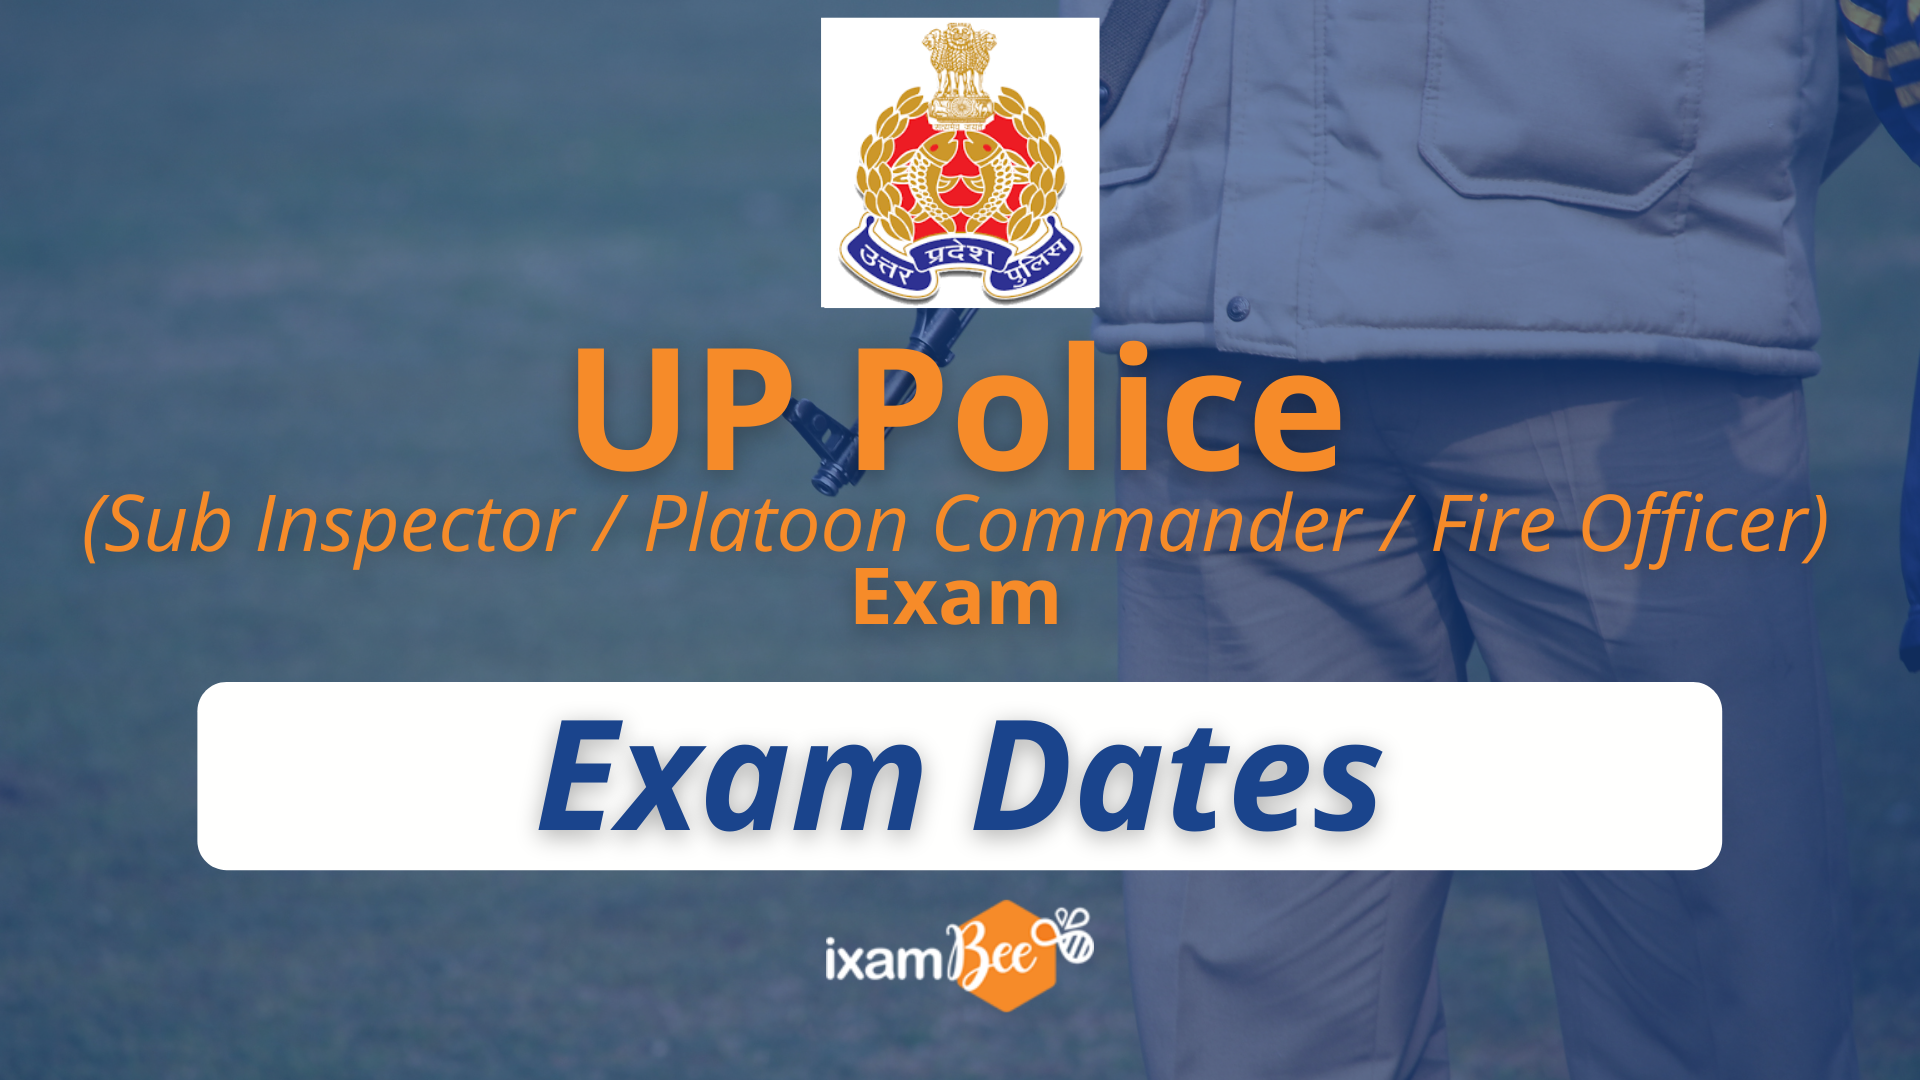 UP Police (Sub Inspector, Platoon Commander, and Fire Officer) Exam Dates